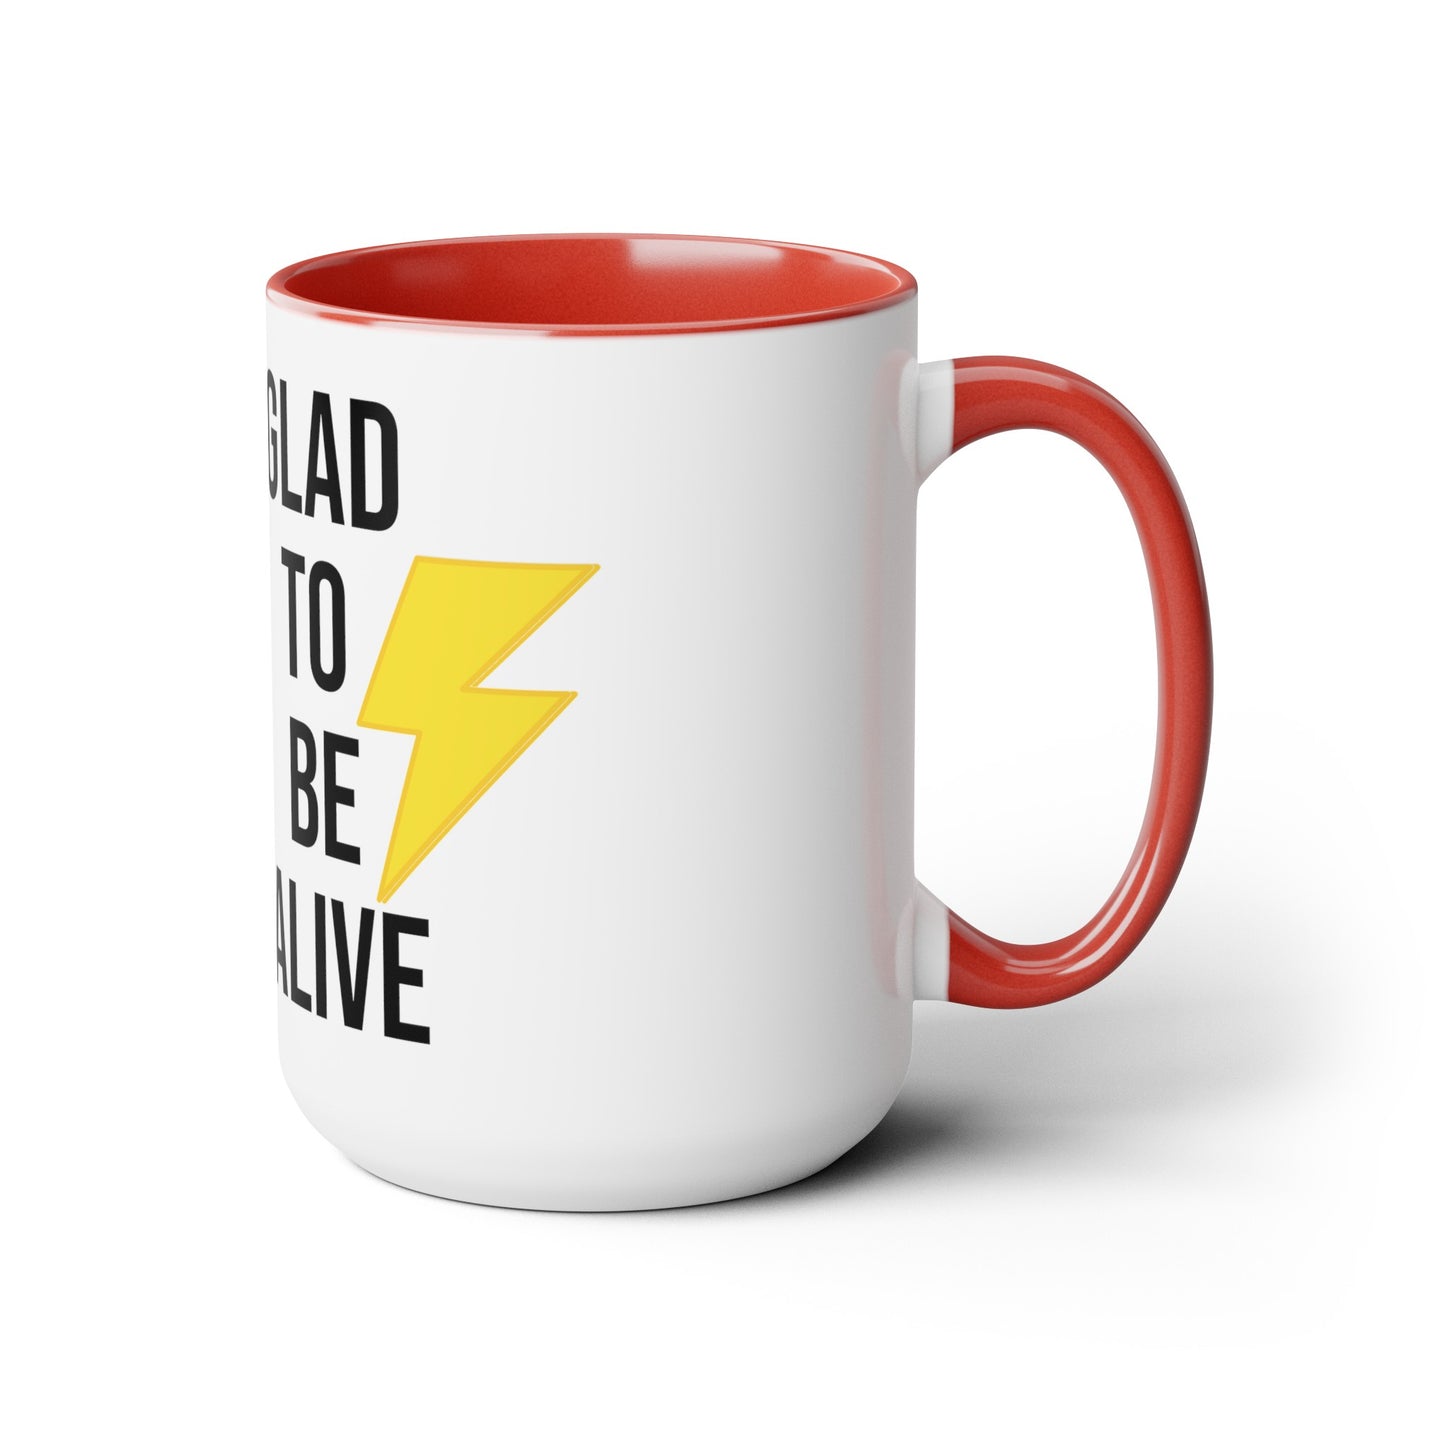 Glad To Be Alive Two-Tone Coffee Mugs, 15oz